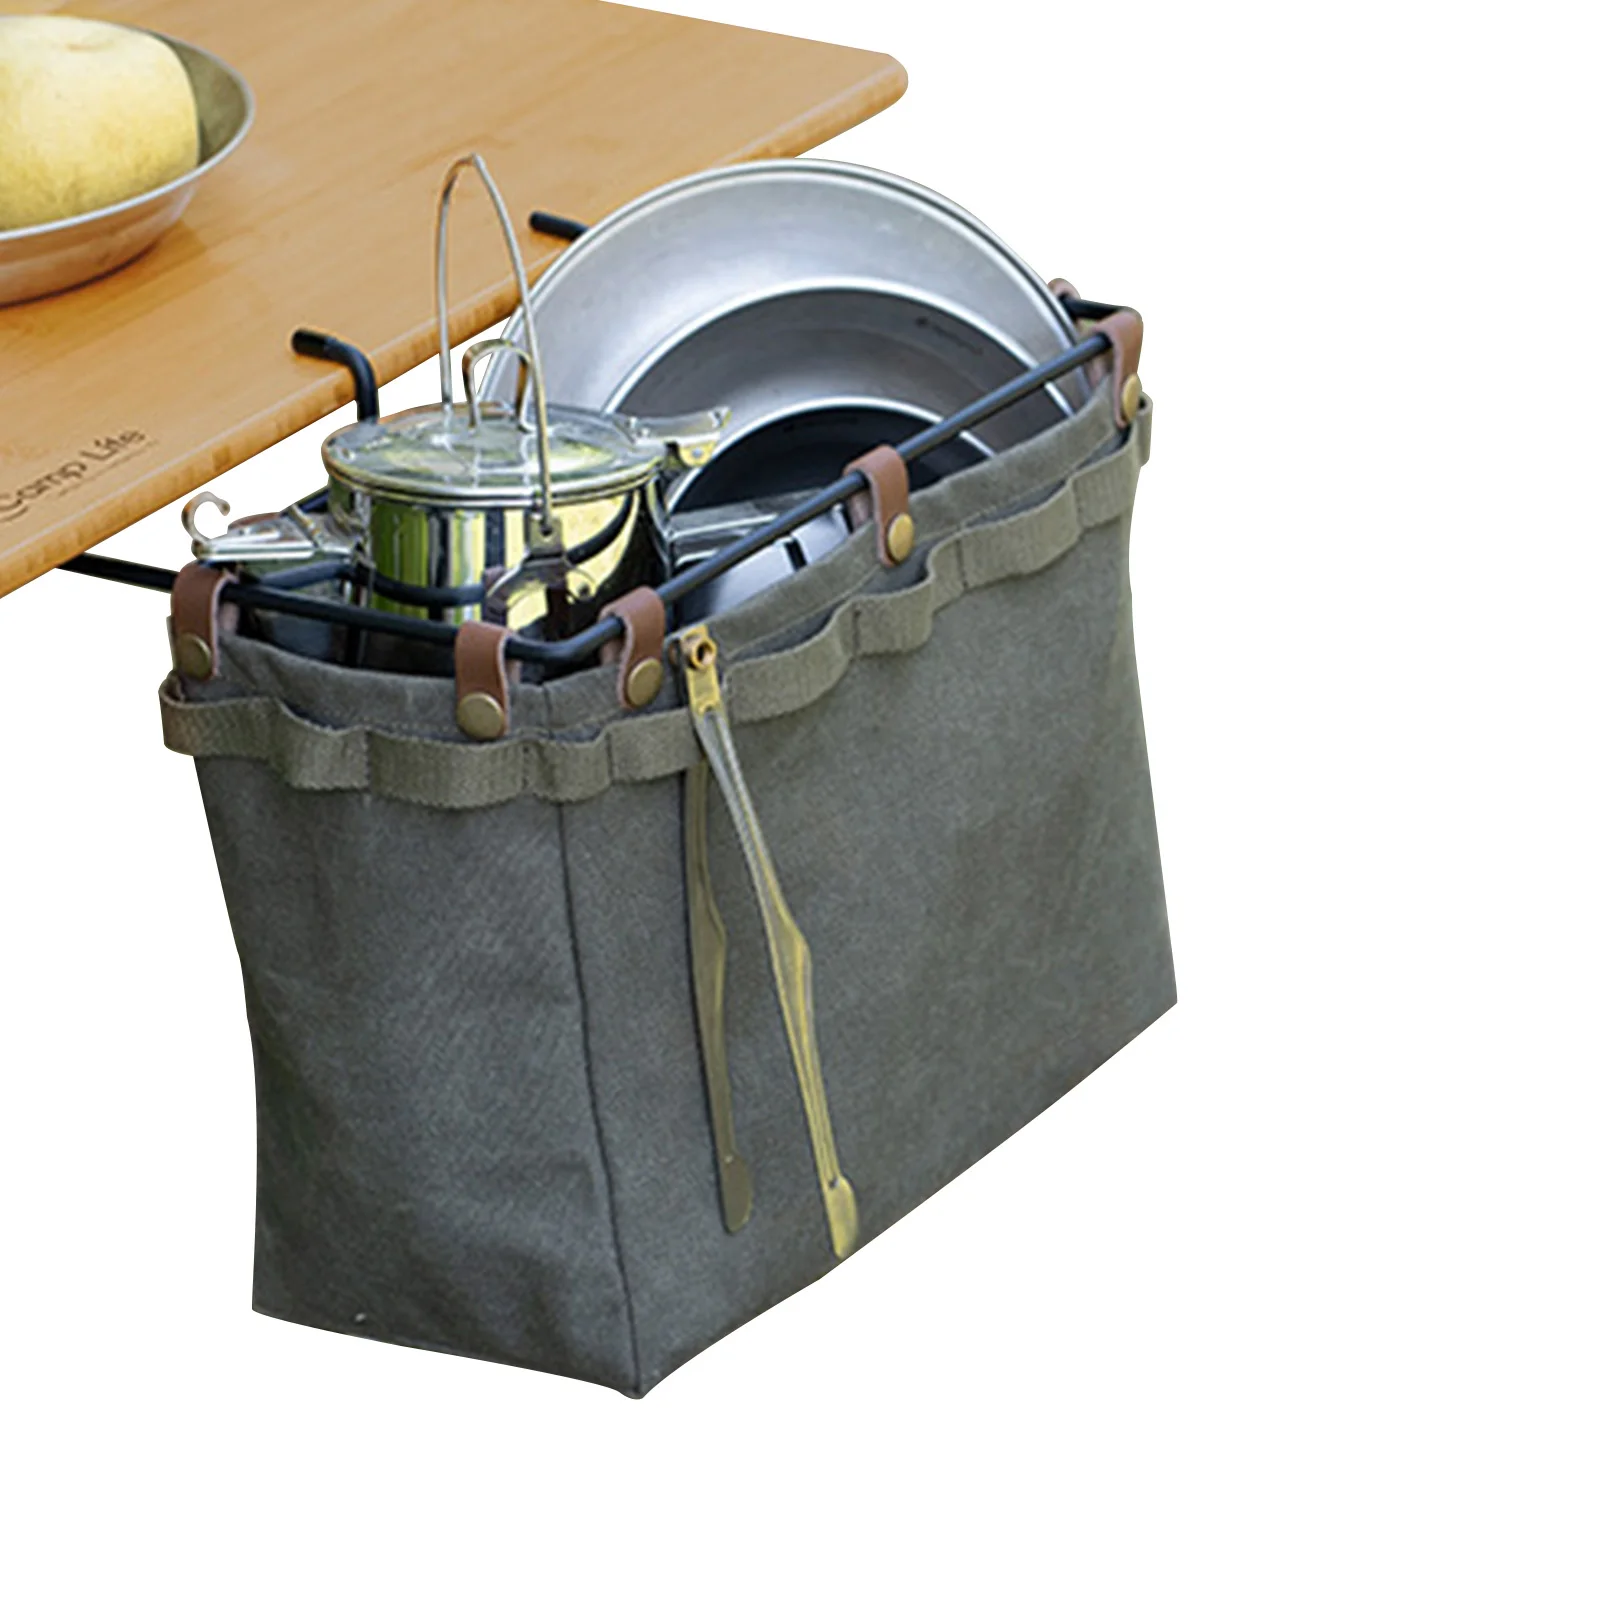 Camping Table Side Hangings Bag Camping Storage Bag Desk Hang Pouch Bags Desktop Organizer Basket For Camping Accessories Picnic